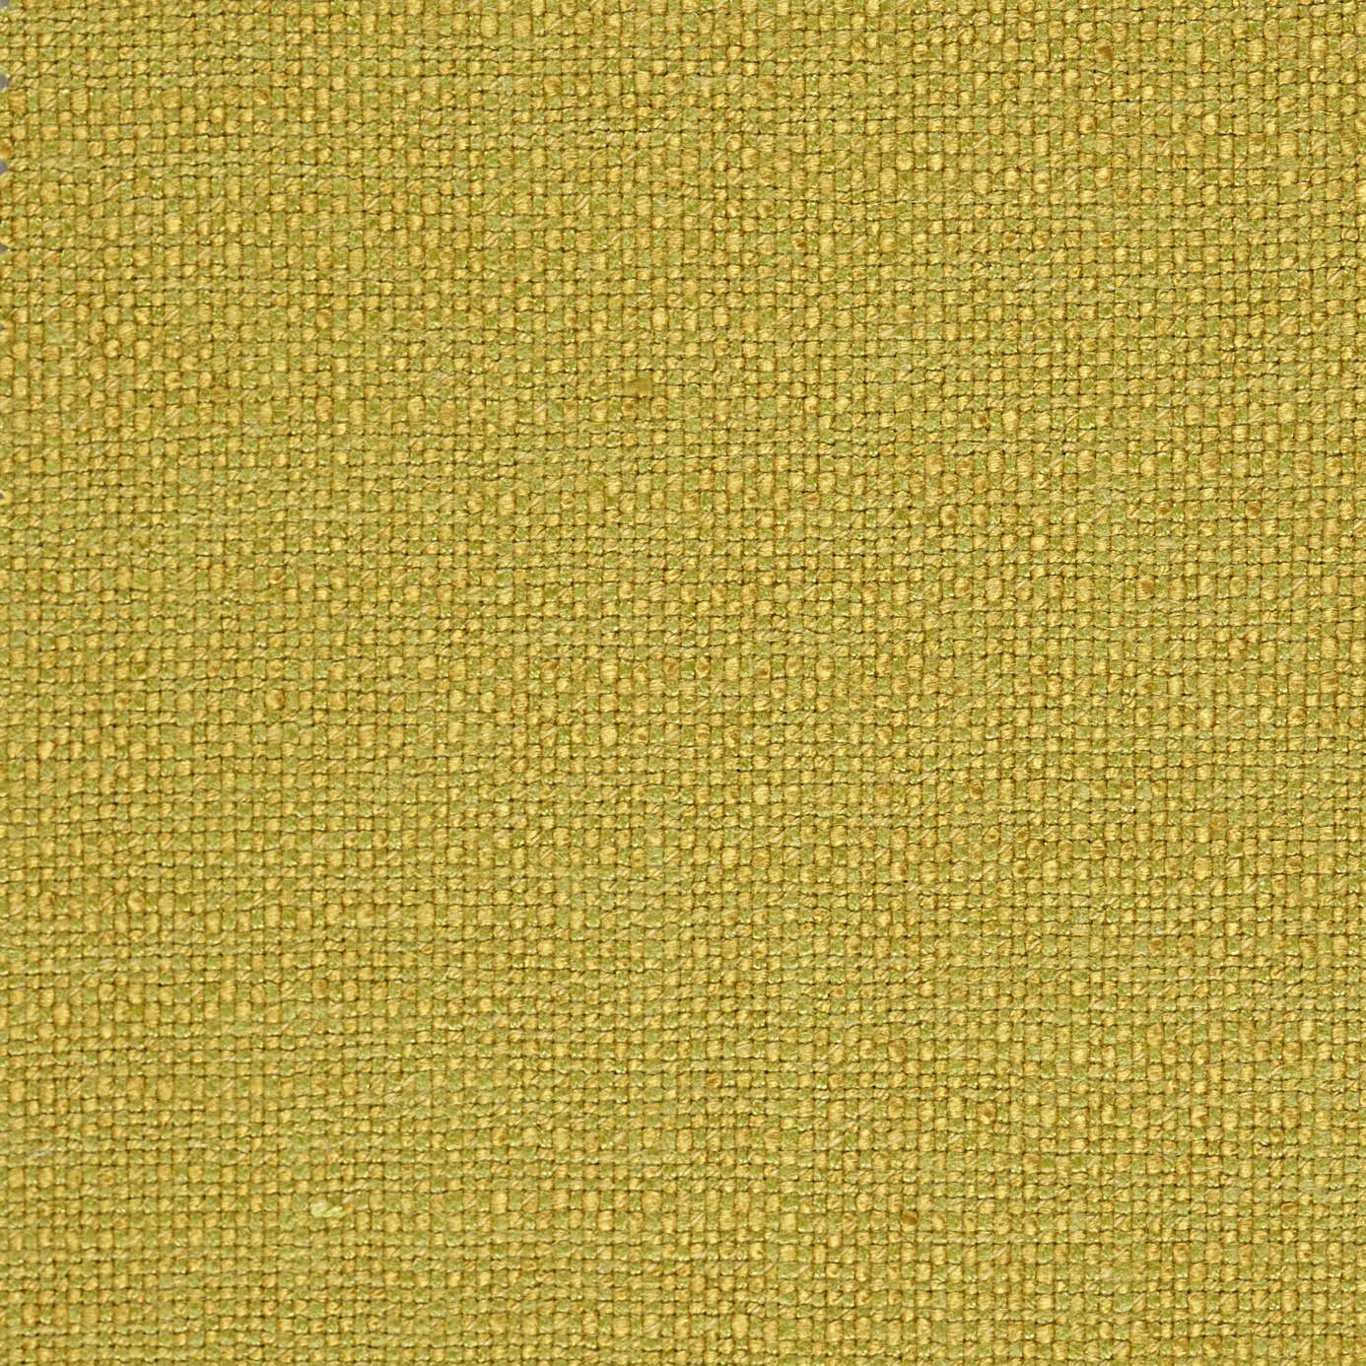 Fission Gooseberry Fabric by HAR